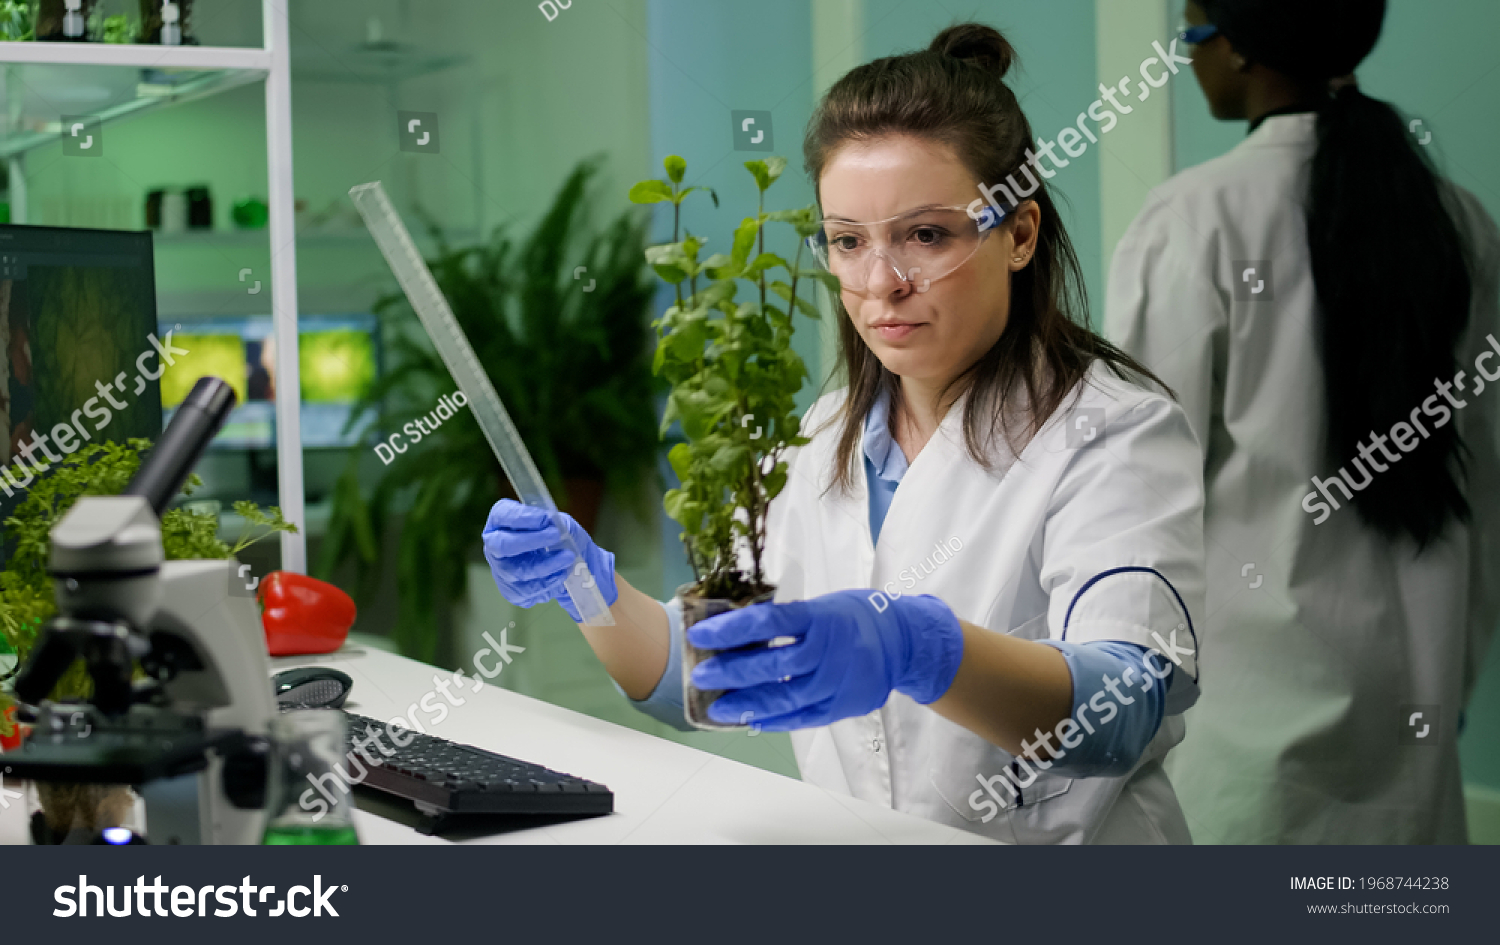 Botanist researcher measure sapling for botany experiment working in pharmaceutical laboratory. Biochemist scientist examining organic plants typing expertise information on computer #1968744238